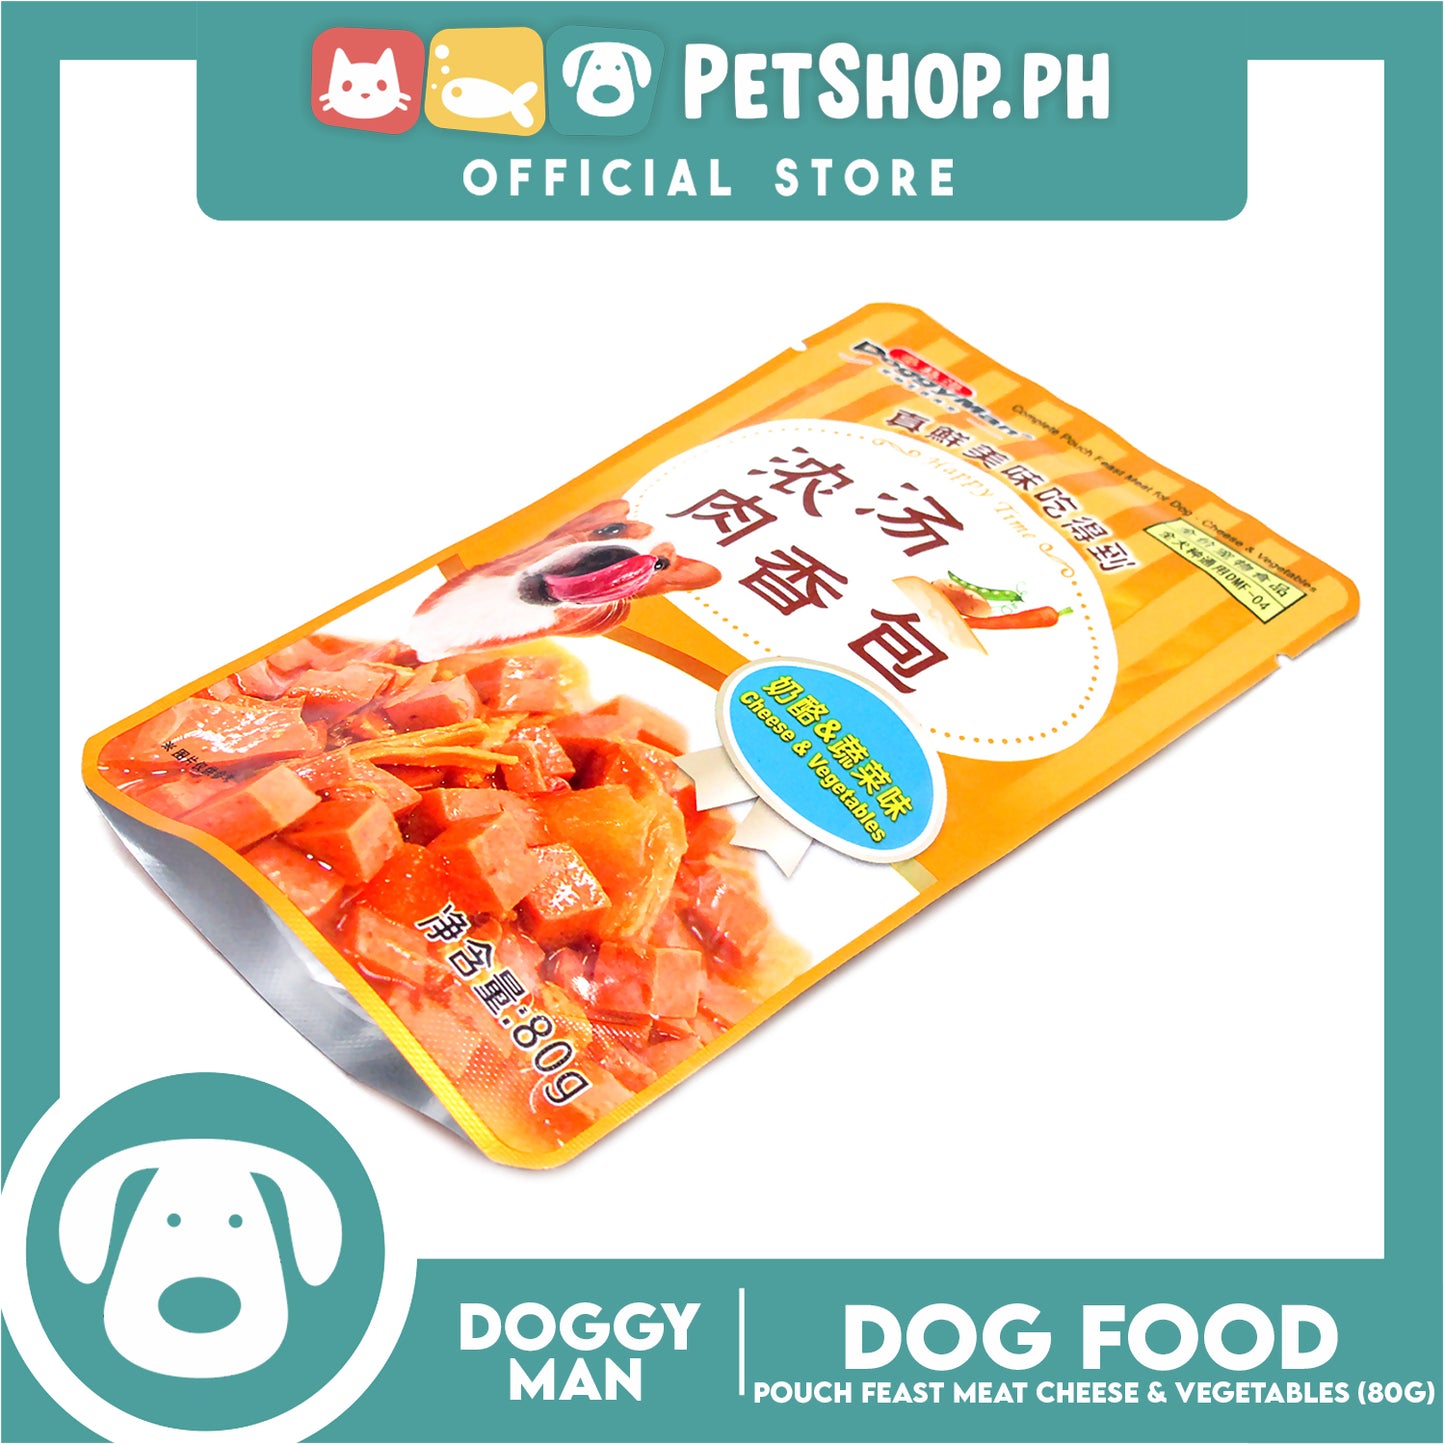 Doggyman Pouch Feast Dog Food 80g (Cheese And Vegetable) Z0180 Dog Pouch Food, Dog Wet Food